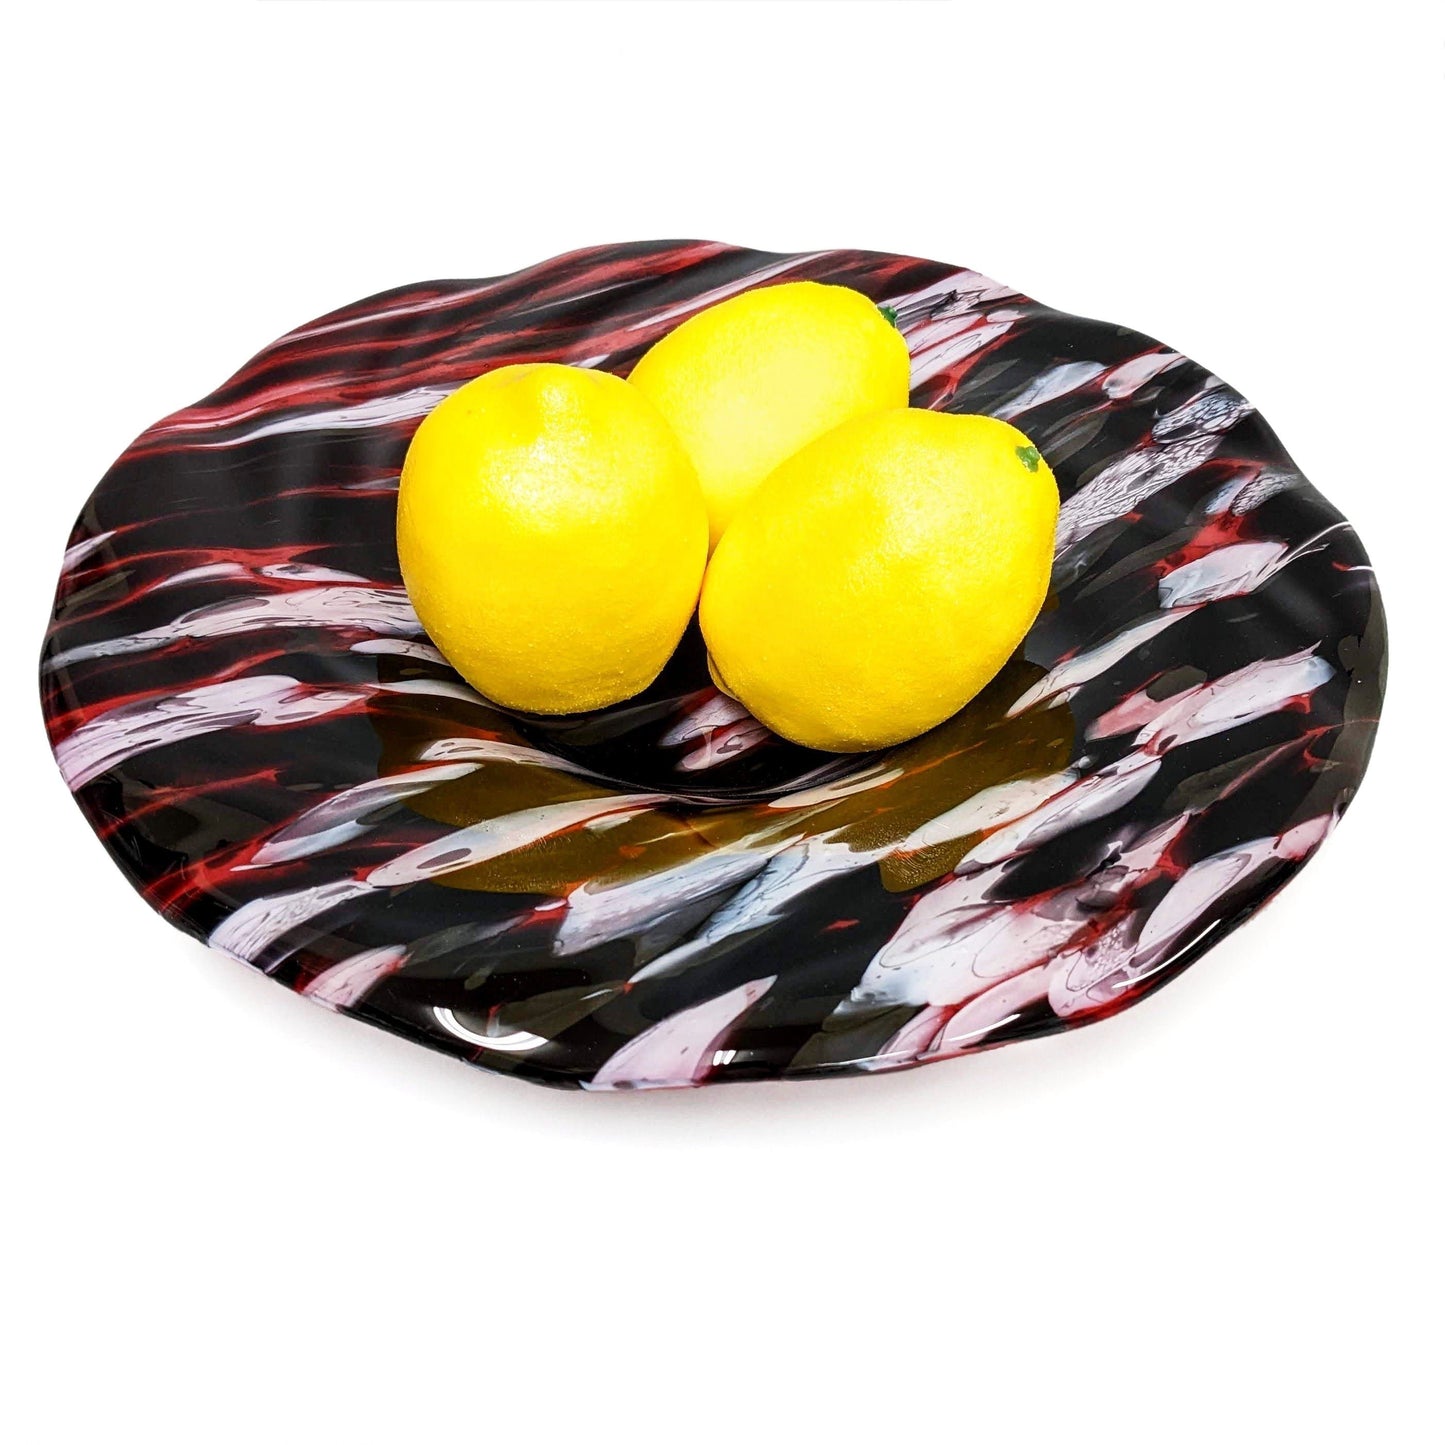 Modern Decorative Glass Art Bowl in Red Black and White